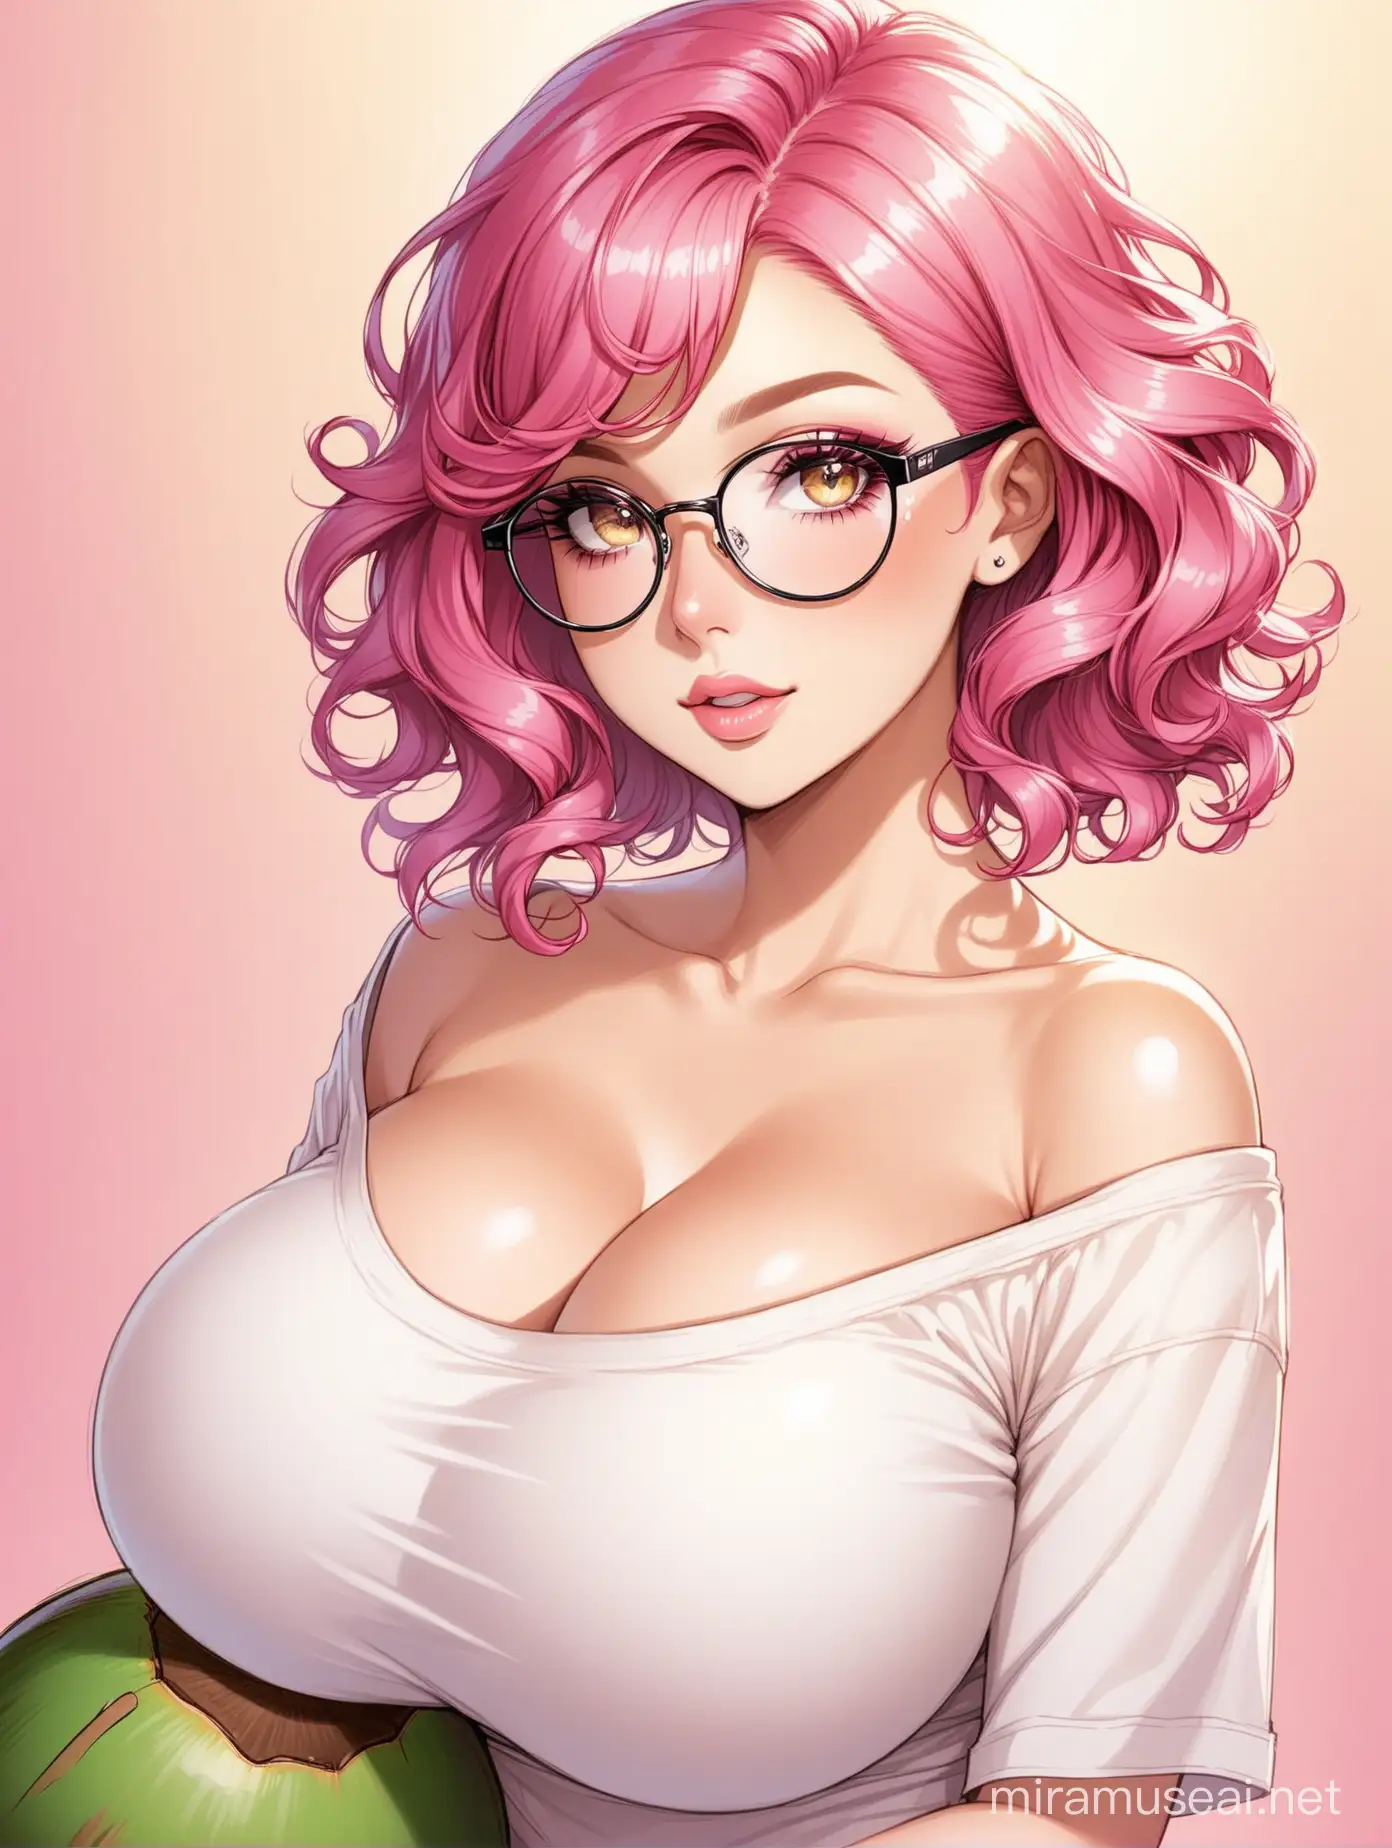 Stylish Woman with Pink Curly Hair and Coconut Top